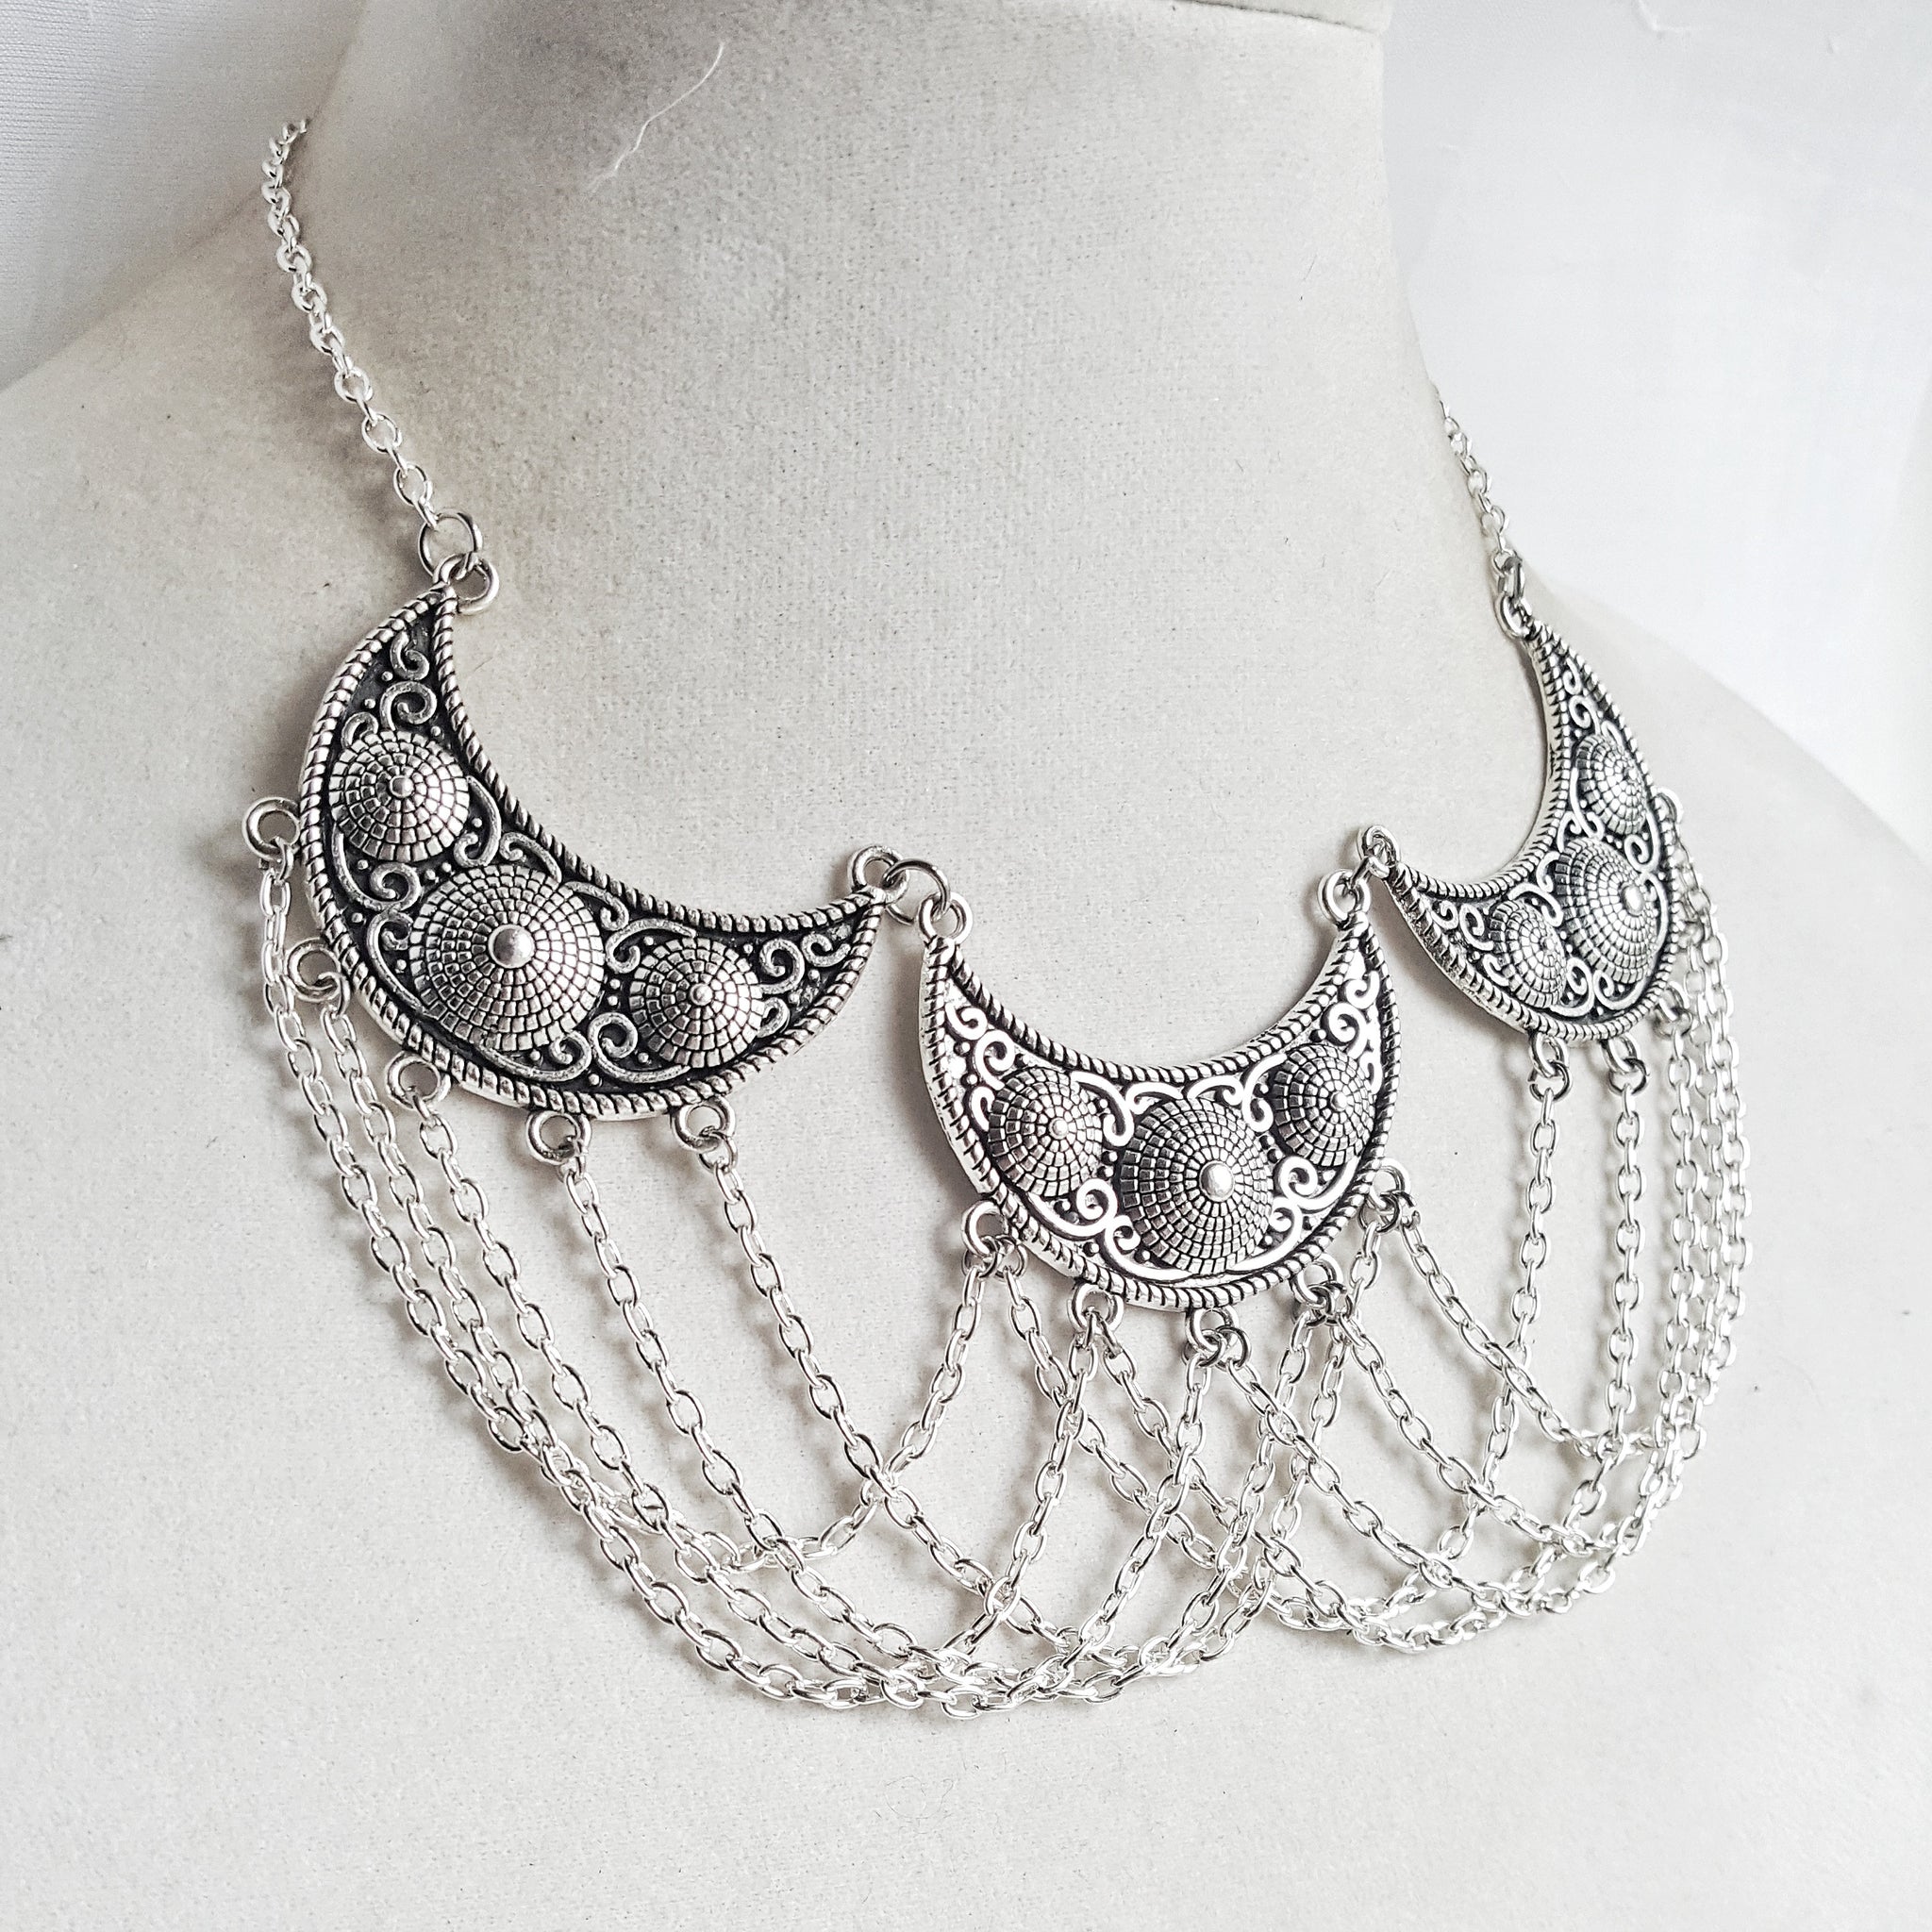 All Chained Up Medieval Necklace - DRAVYNMOOR